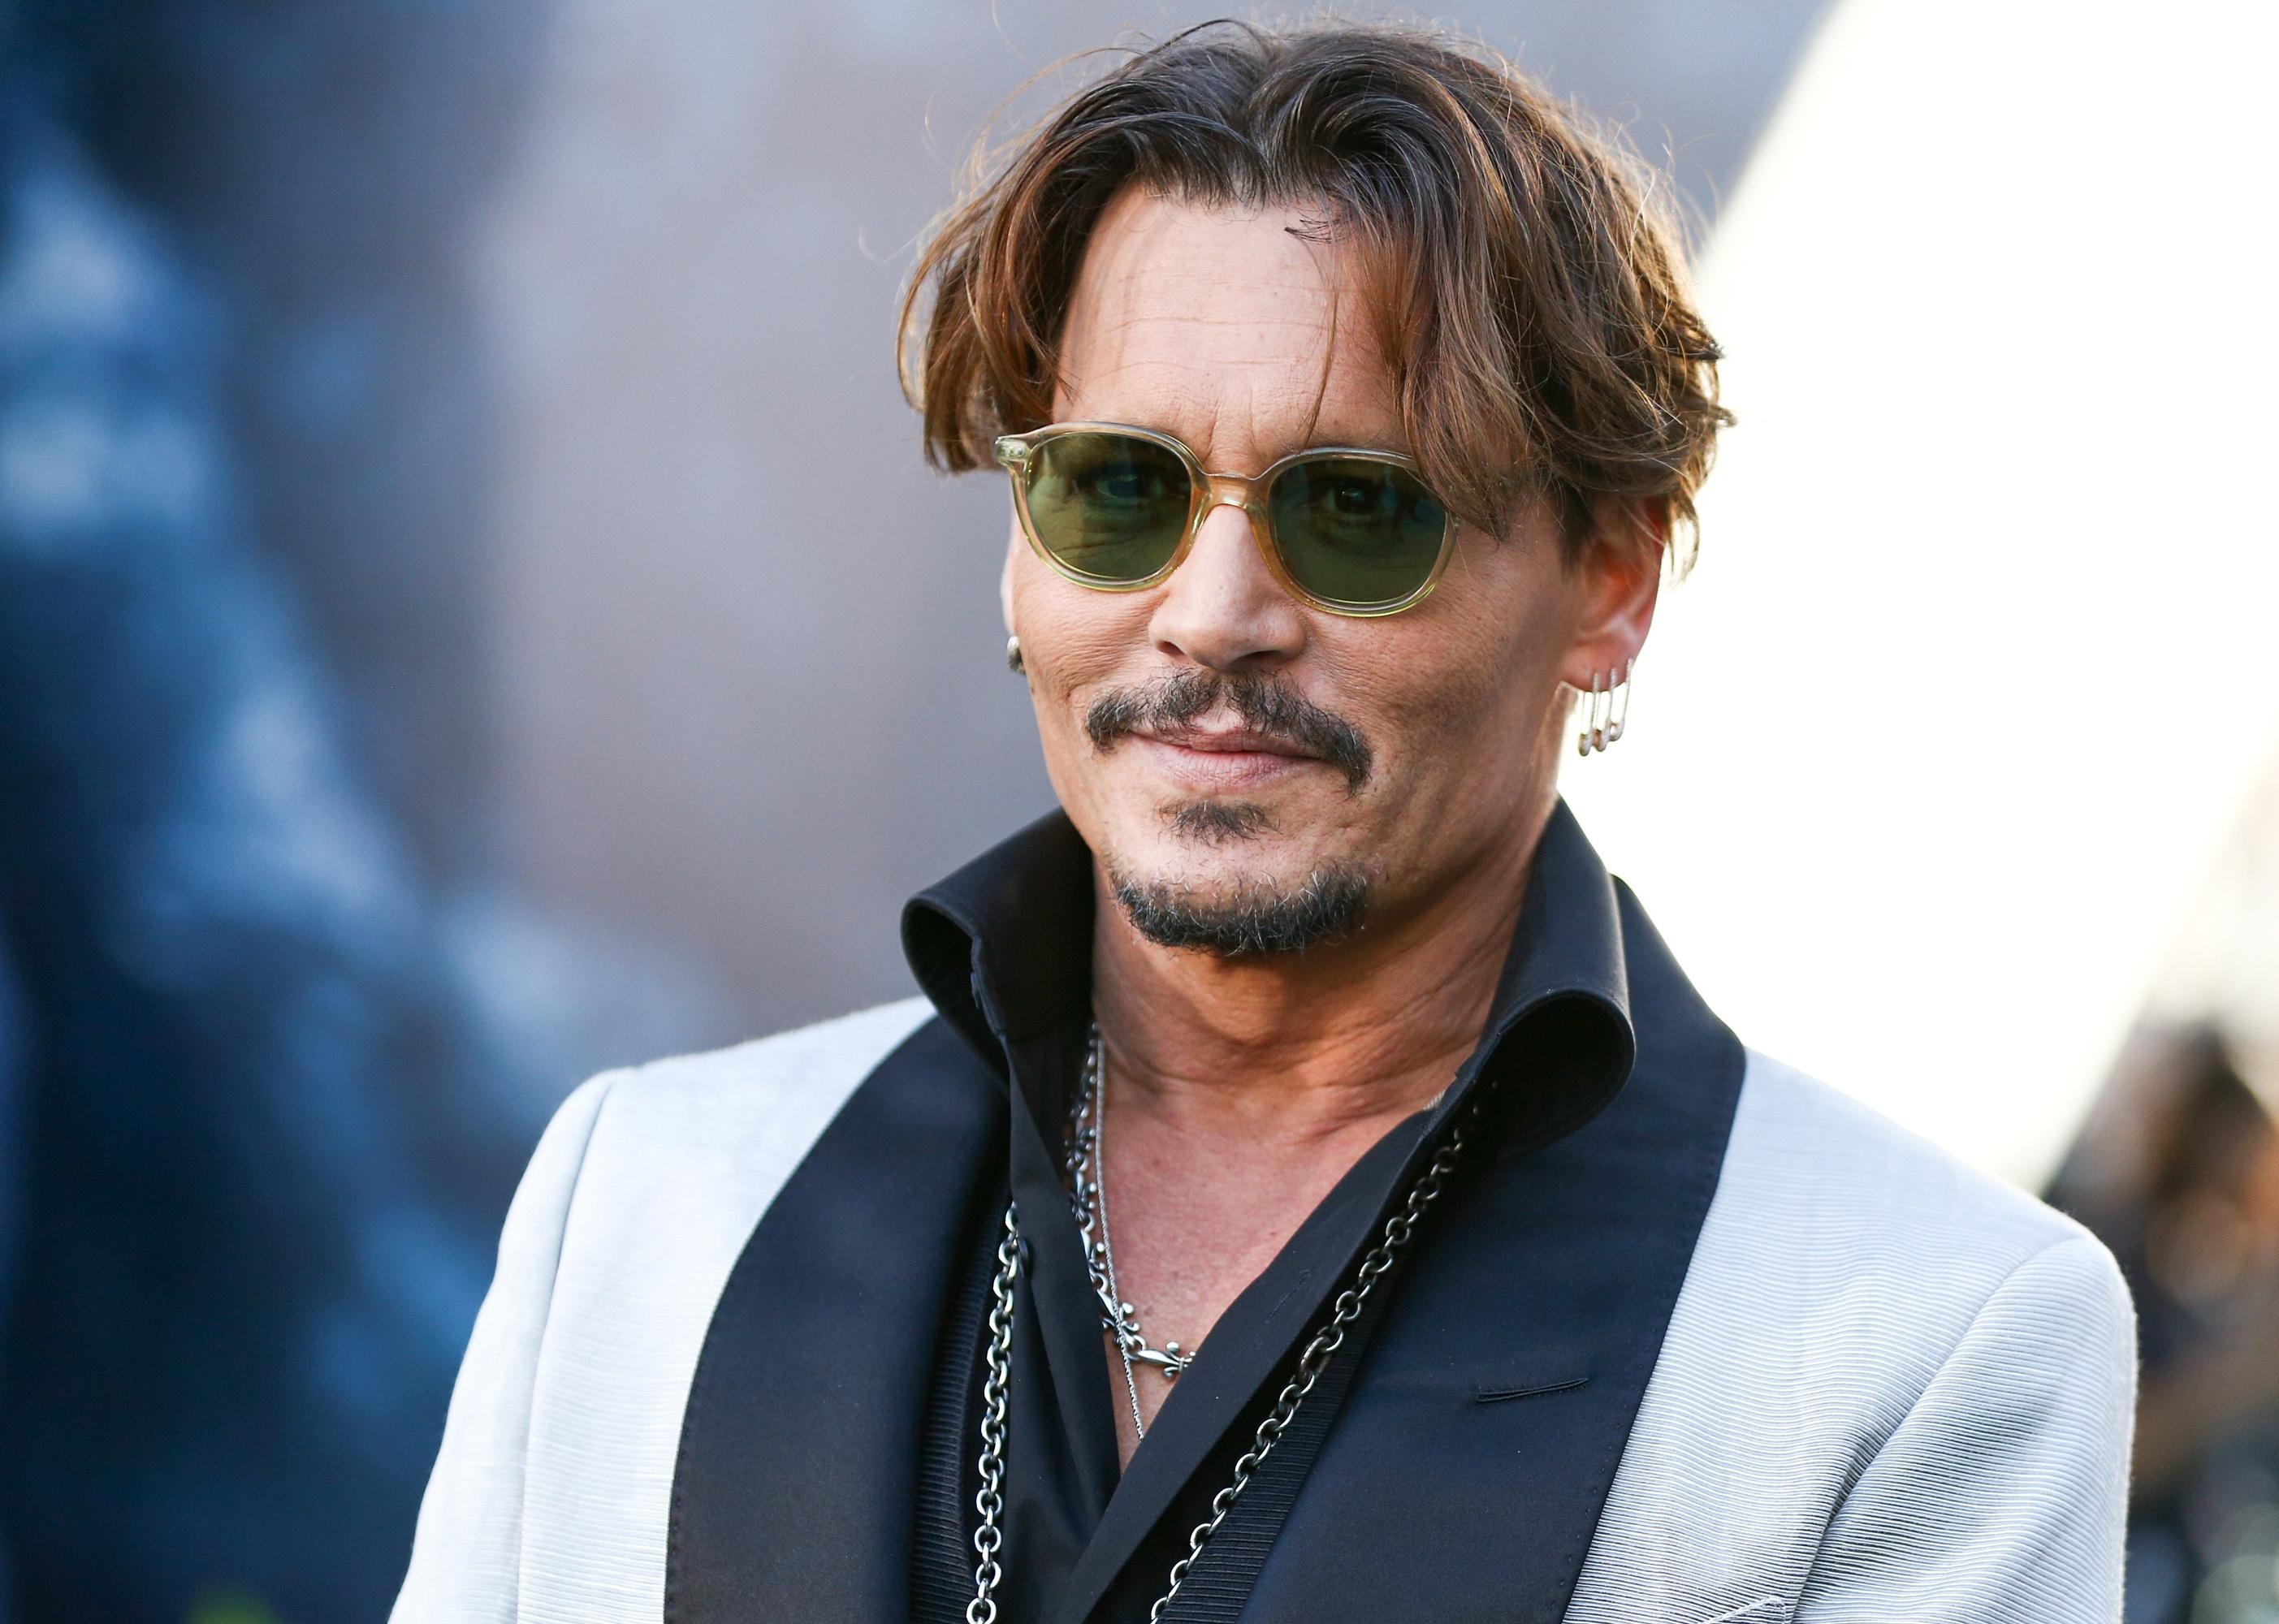 Johnny Depp attends the premiere of Disney